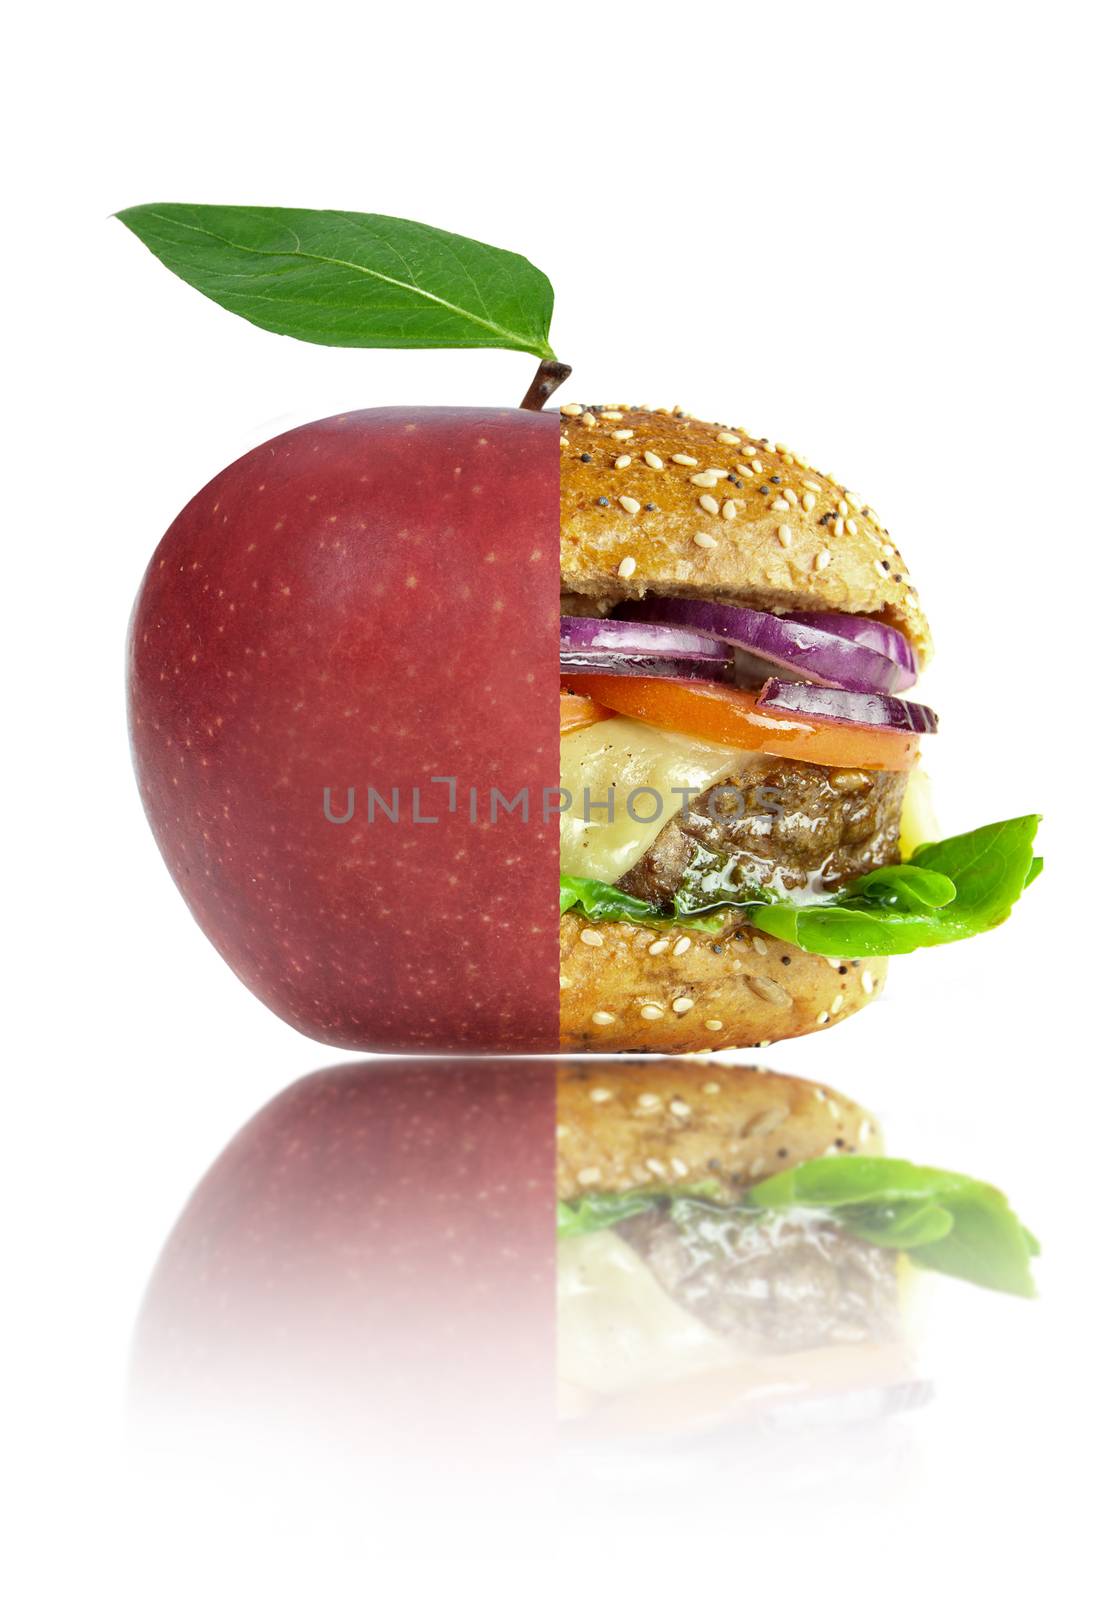 Healthy apple and unheatlhy burger merged into one over a white background